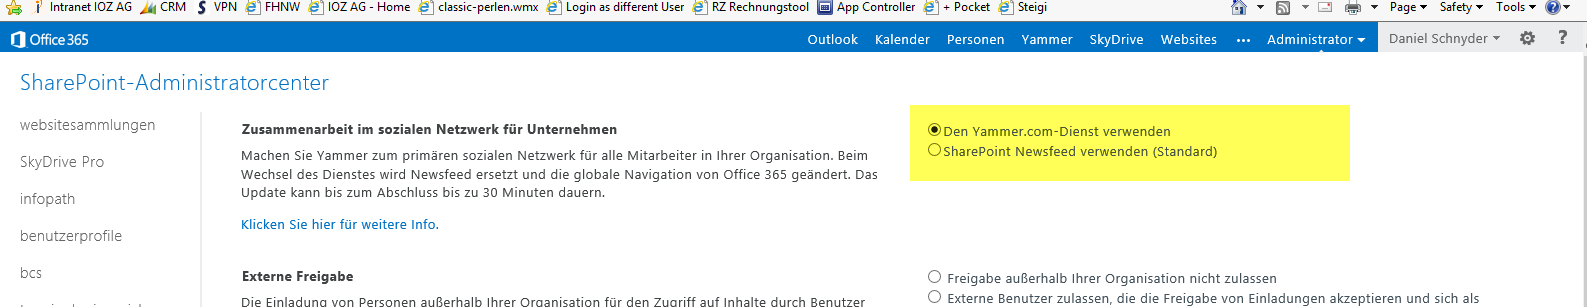 YAMMER IN OFFICE 365